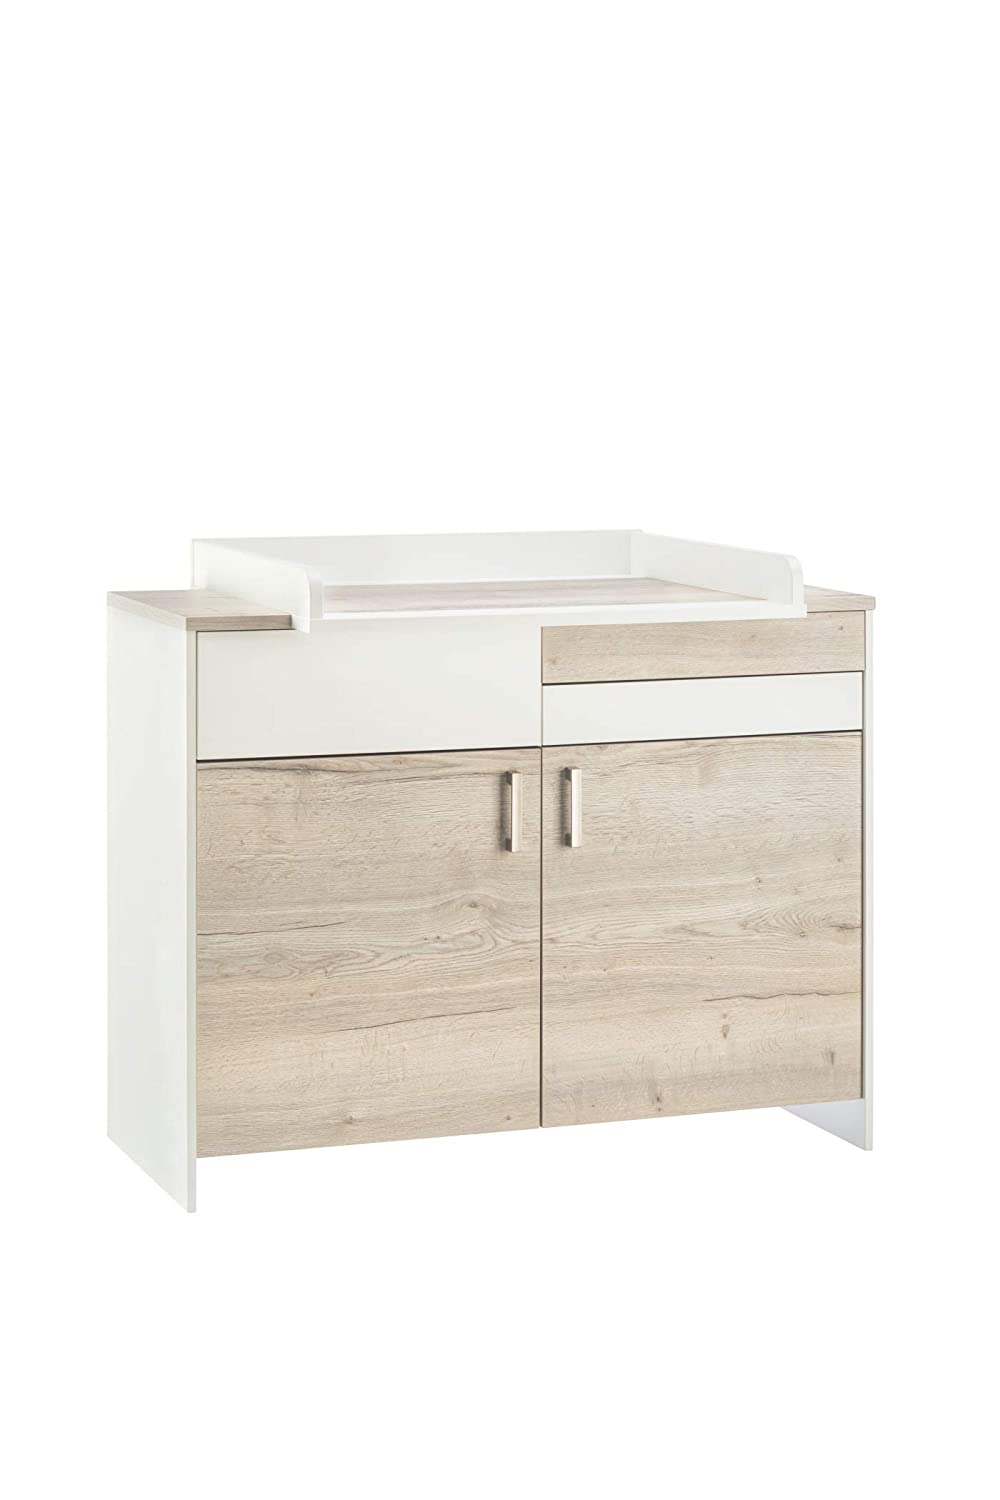 Schardt 05 950 28 00 Changing Table Highlight Oak with Changing Mat Beige